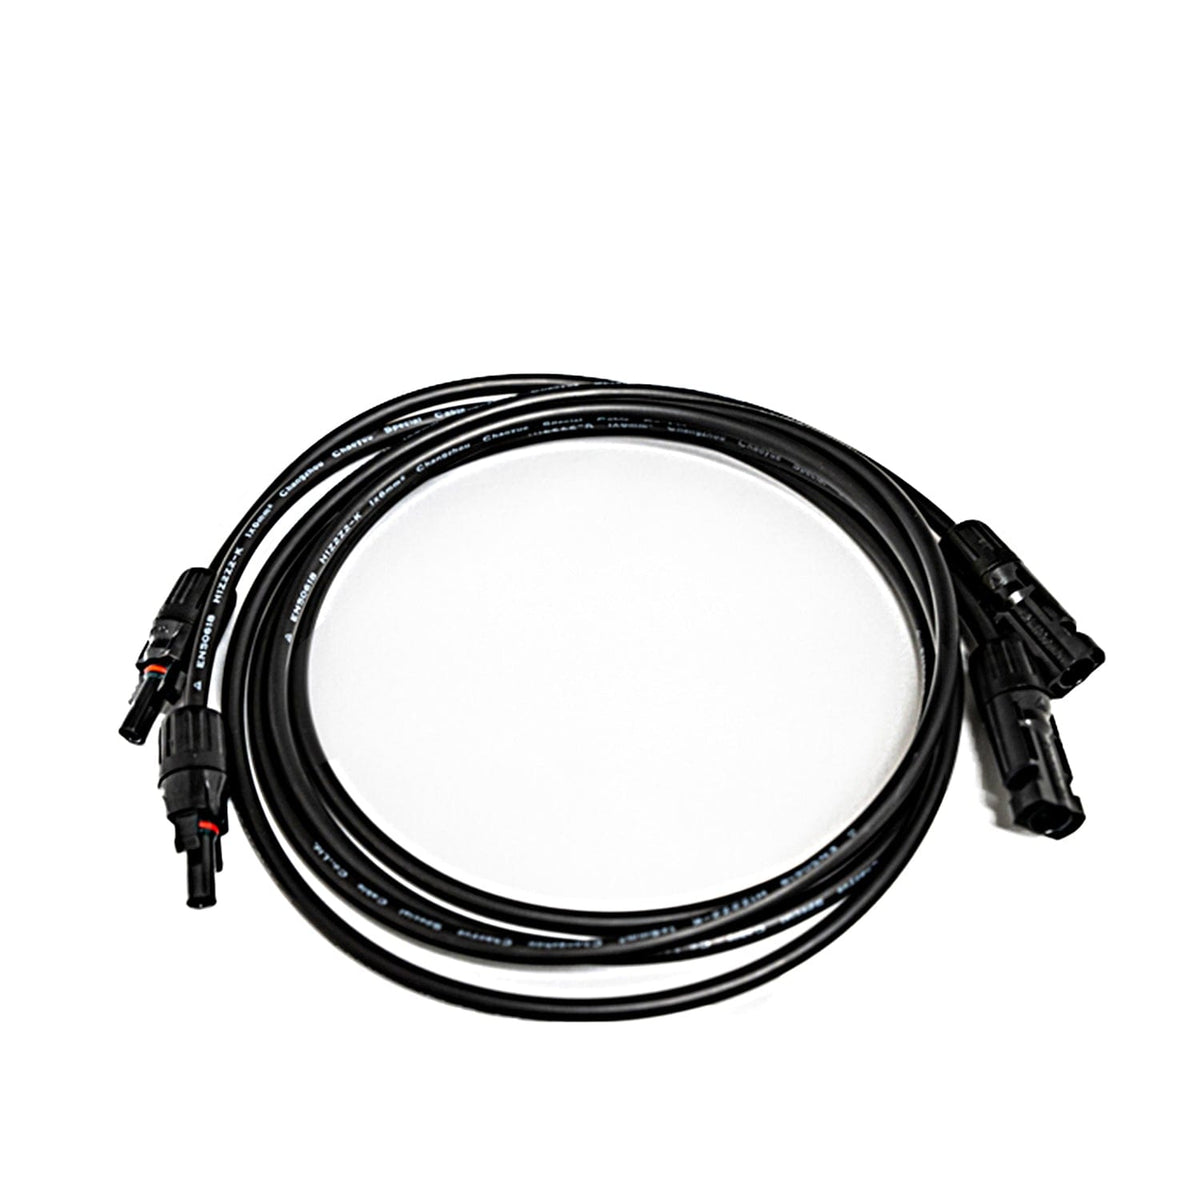 MC4 50 Foot Extender Cable